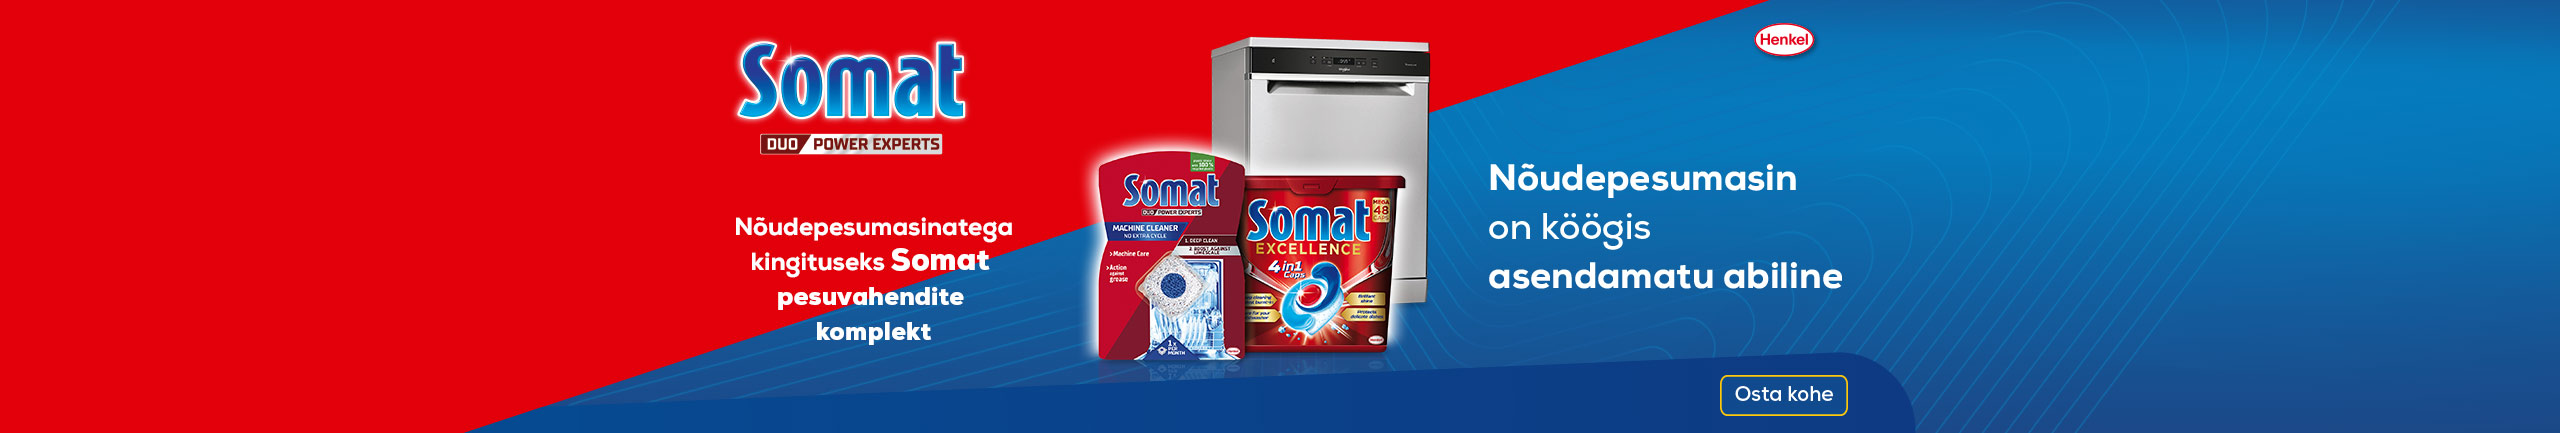 Buy a dishwasher and receive Somat set as a gift!